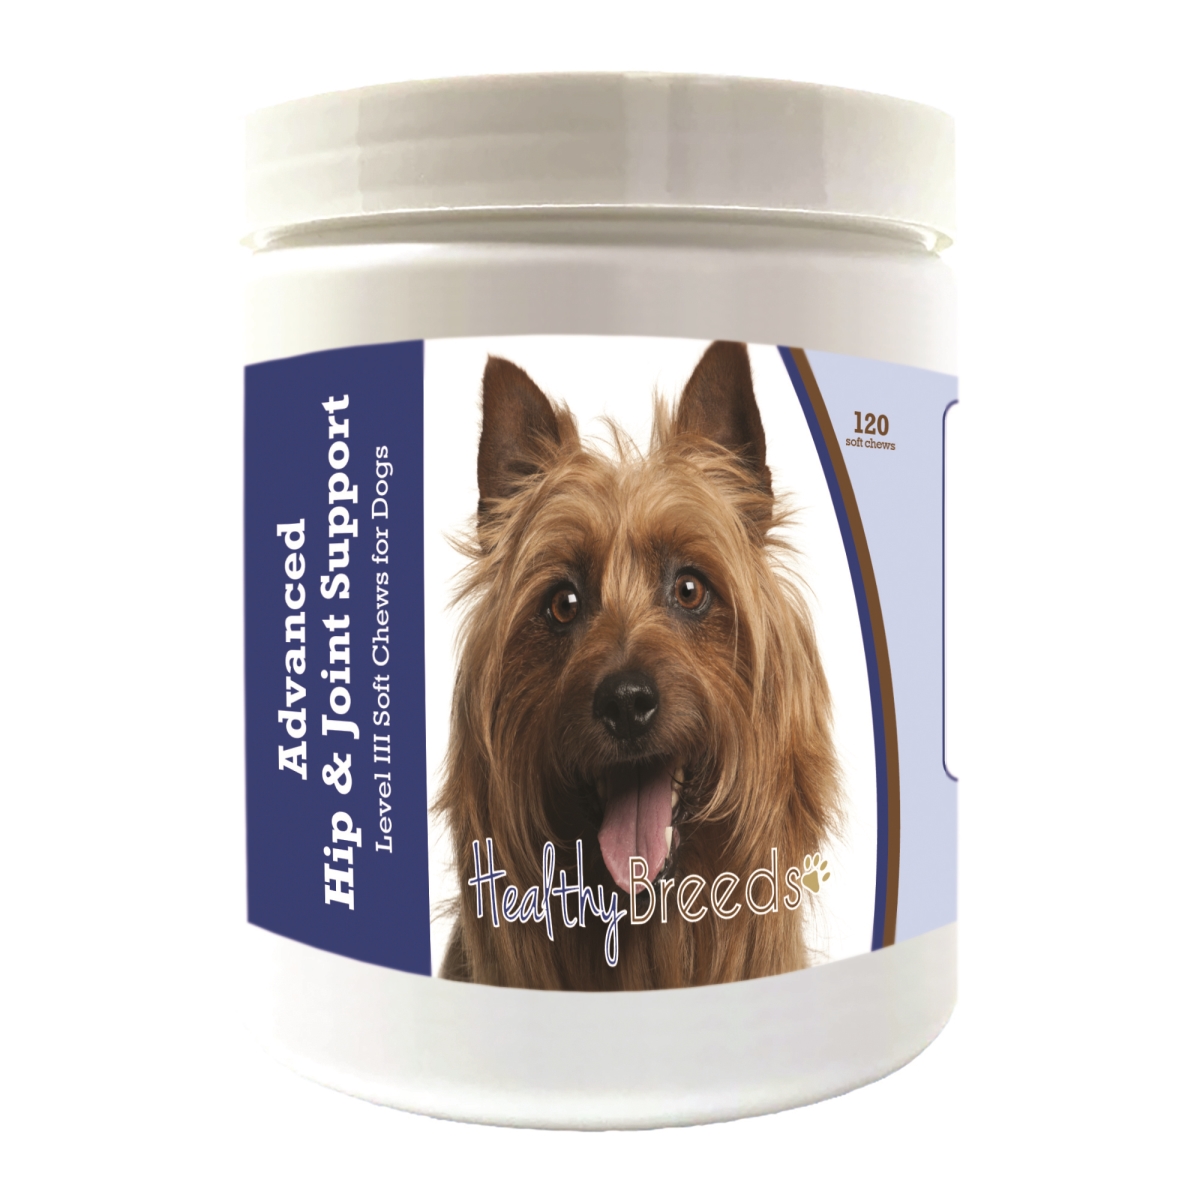 Picture of Healthy Breeds 192959897500 Australian Terrier Advanced Hip & Joint Support Level III Soft Chews for Dogs